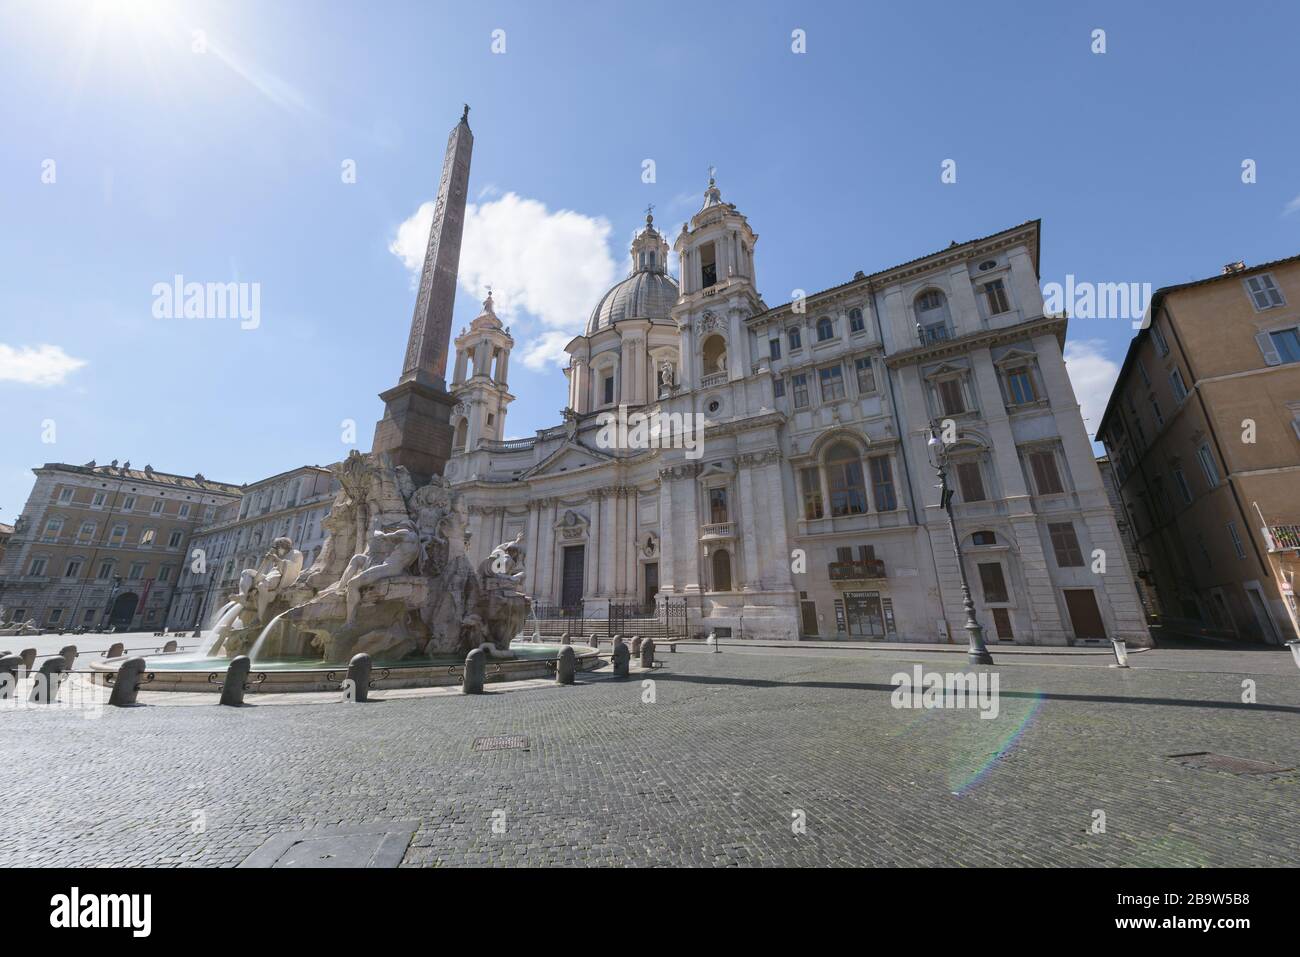 Rome, Italy-12 Mar 2020: Popular tourist spot Piazza Navona is empty following the coronavirus confinement measures put in place by the governement, R Stock Photo